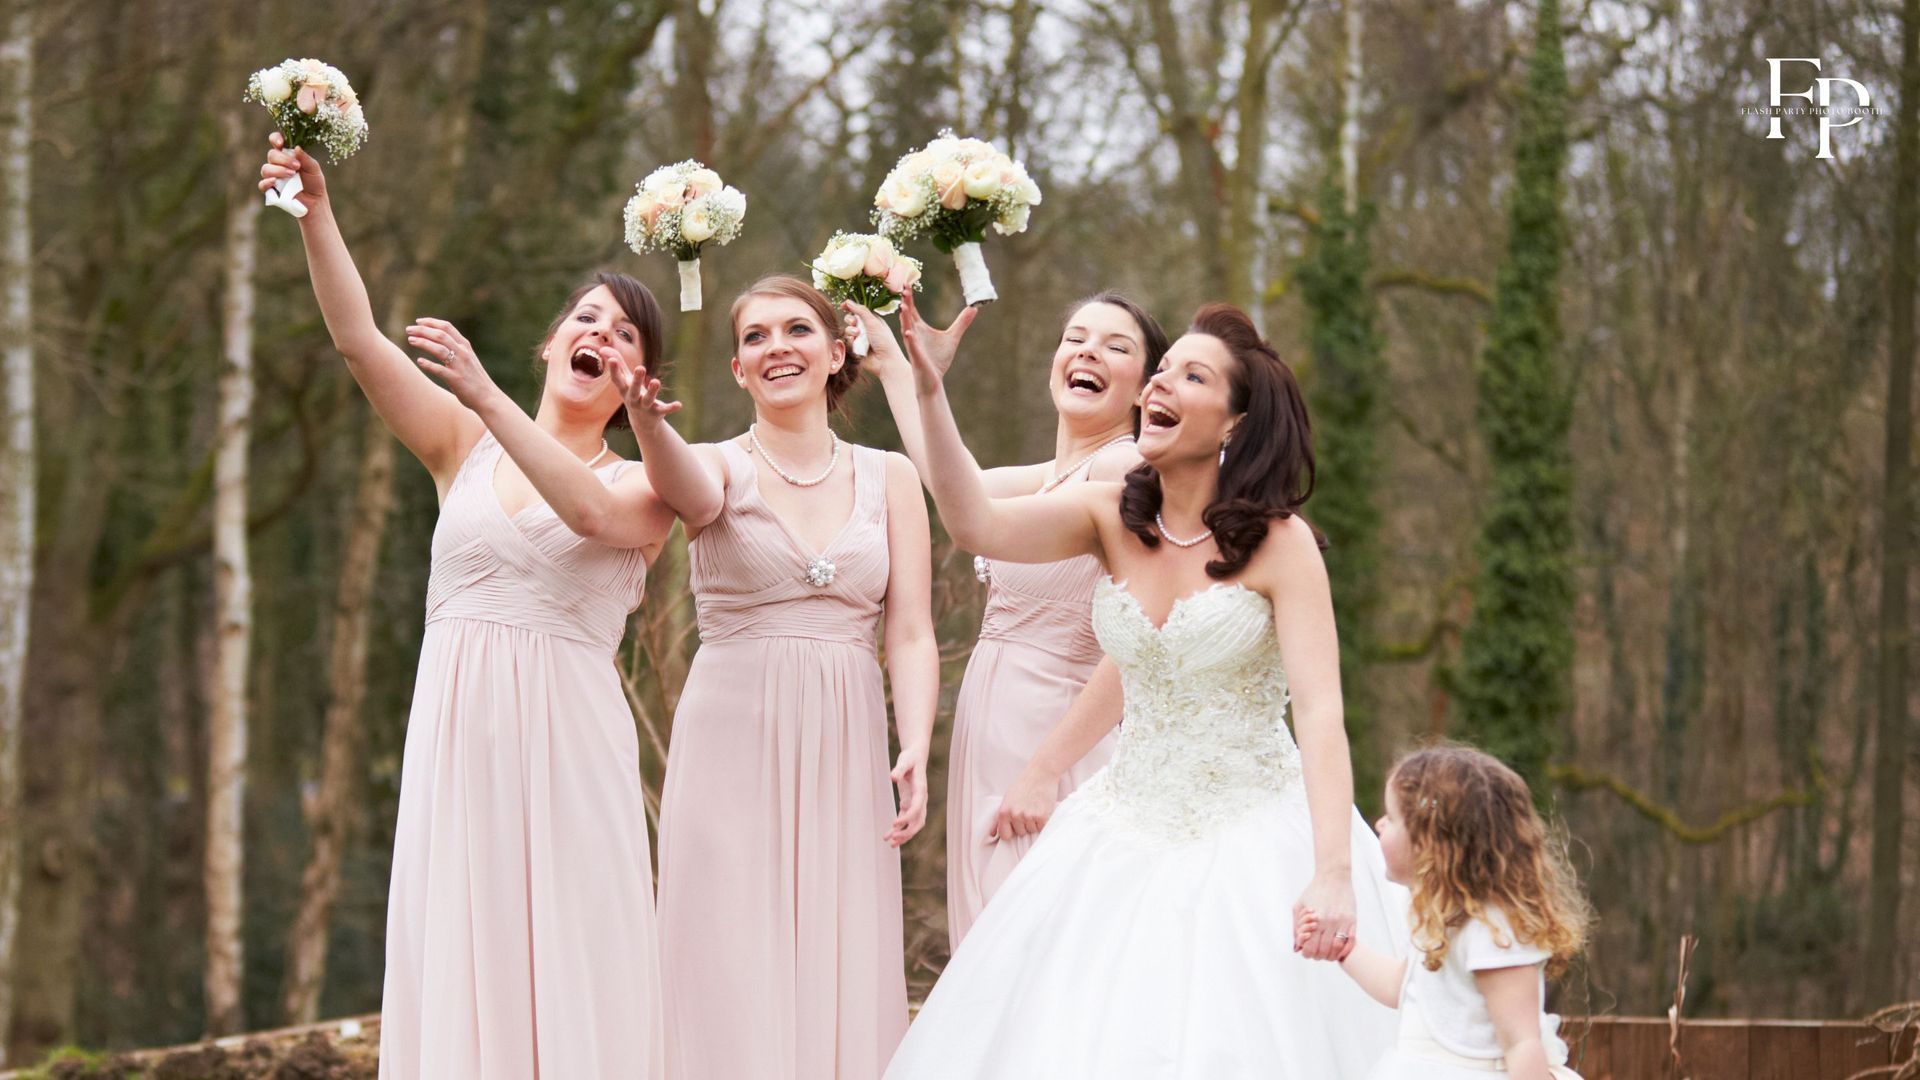 Bride with her daughter and friends posing during her wedding day